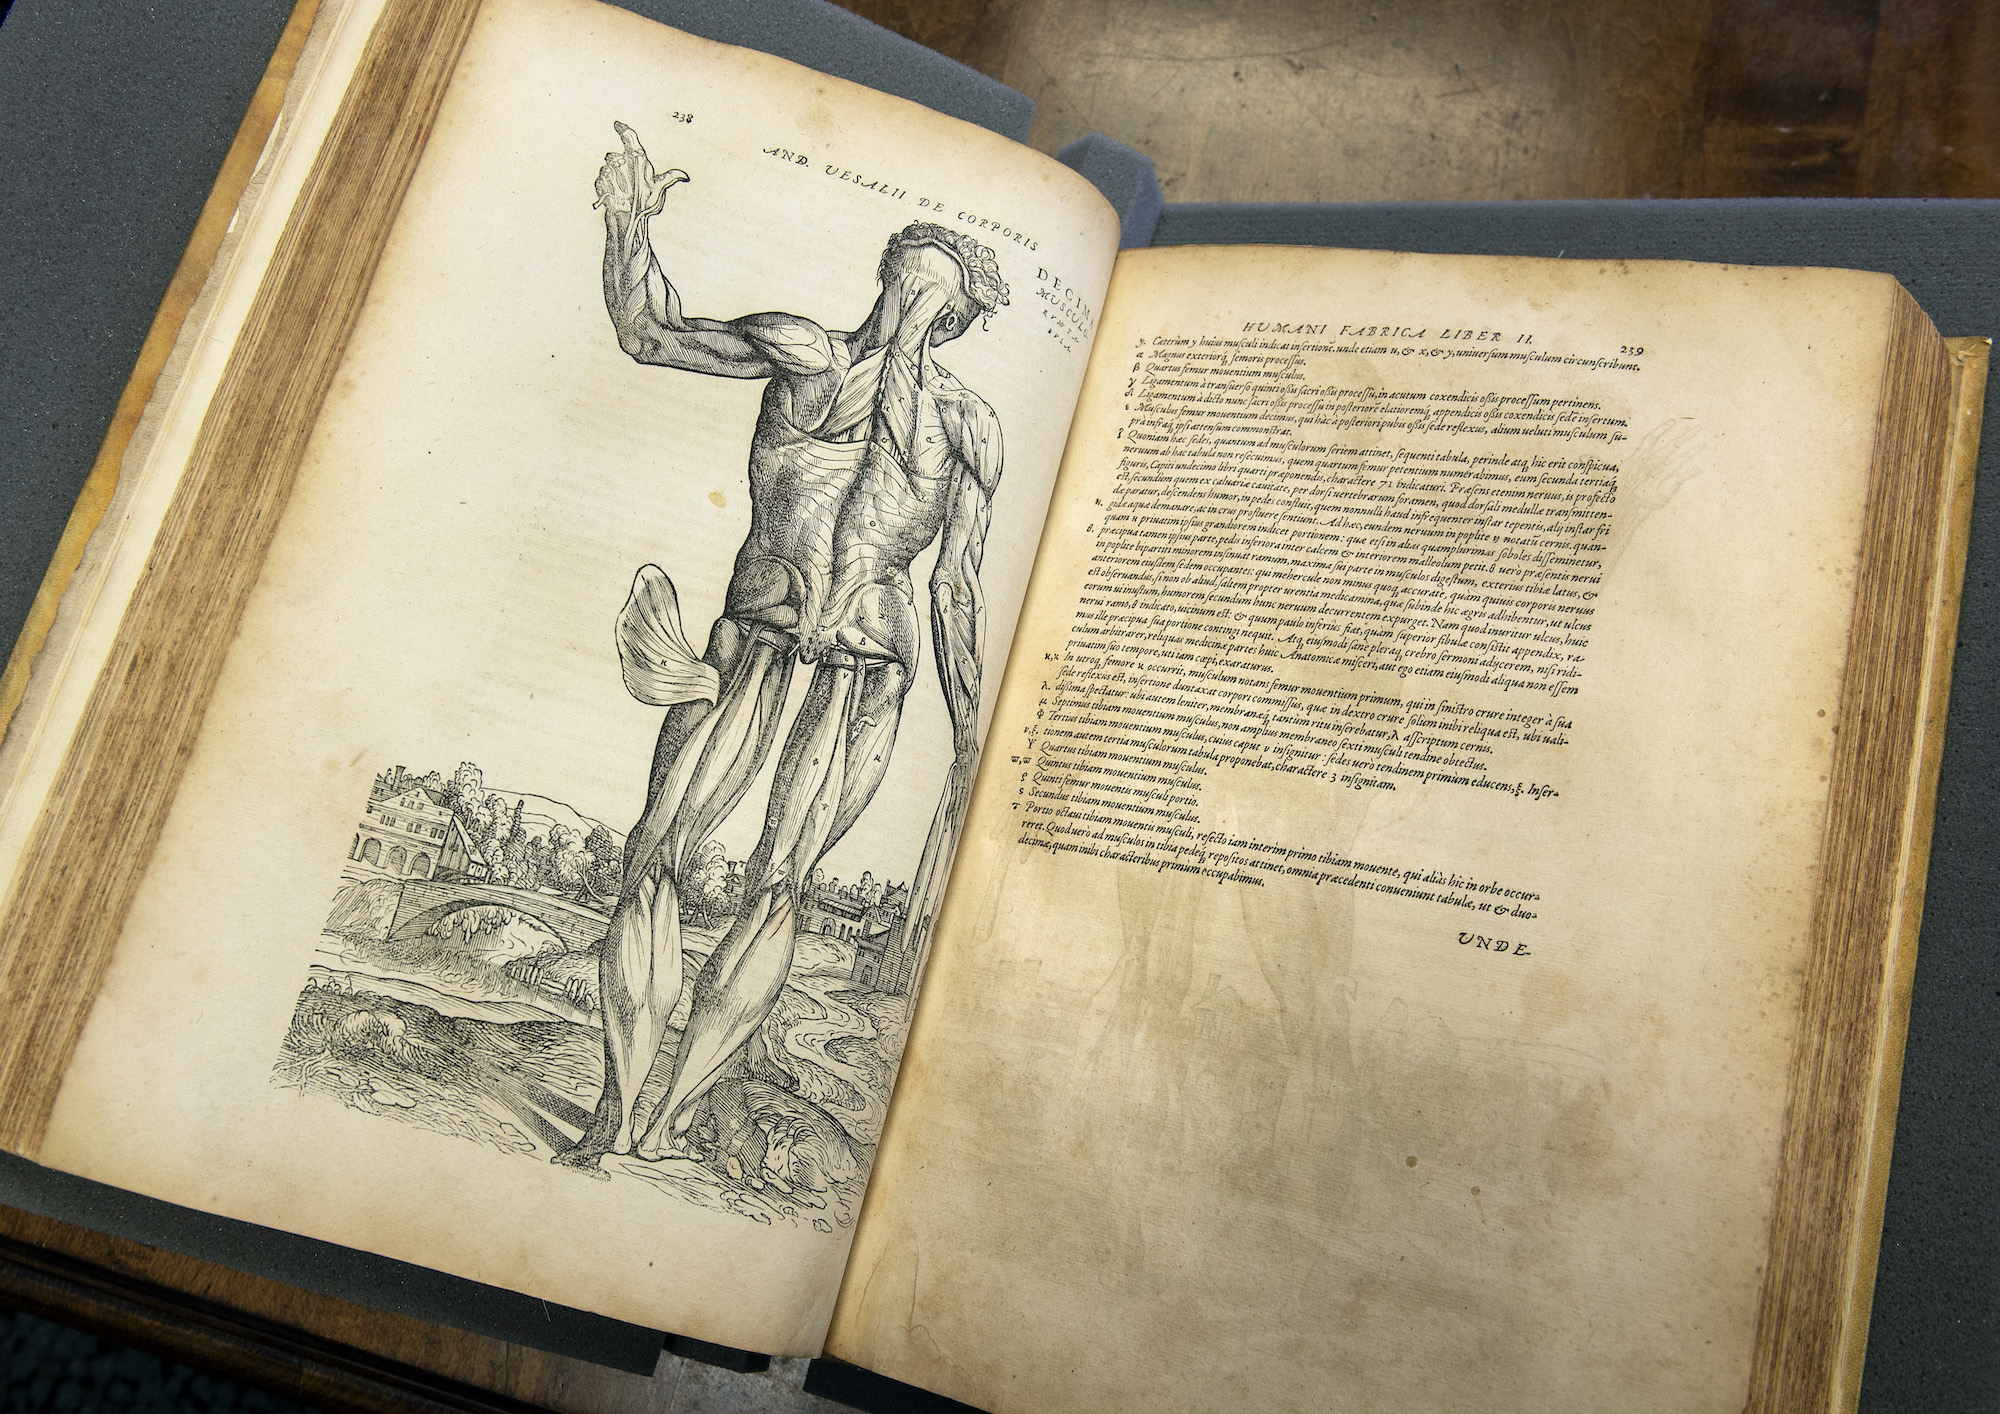 VCU Libraries acquires large collection of rare medical texts, illustrations and documents